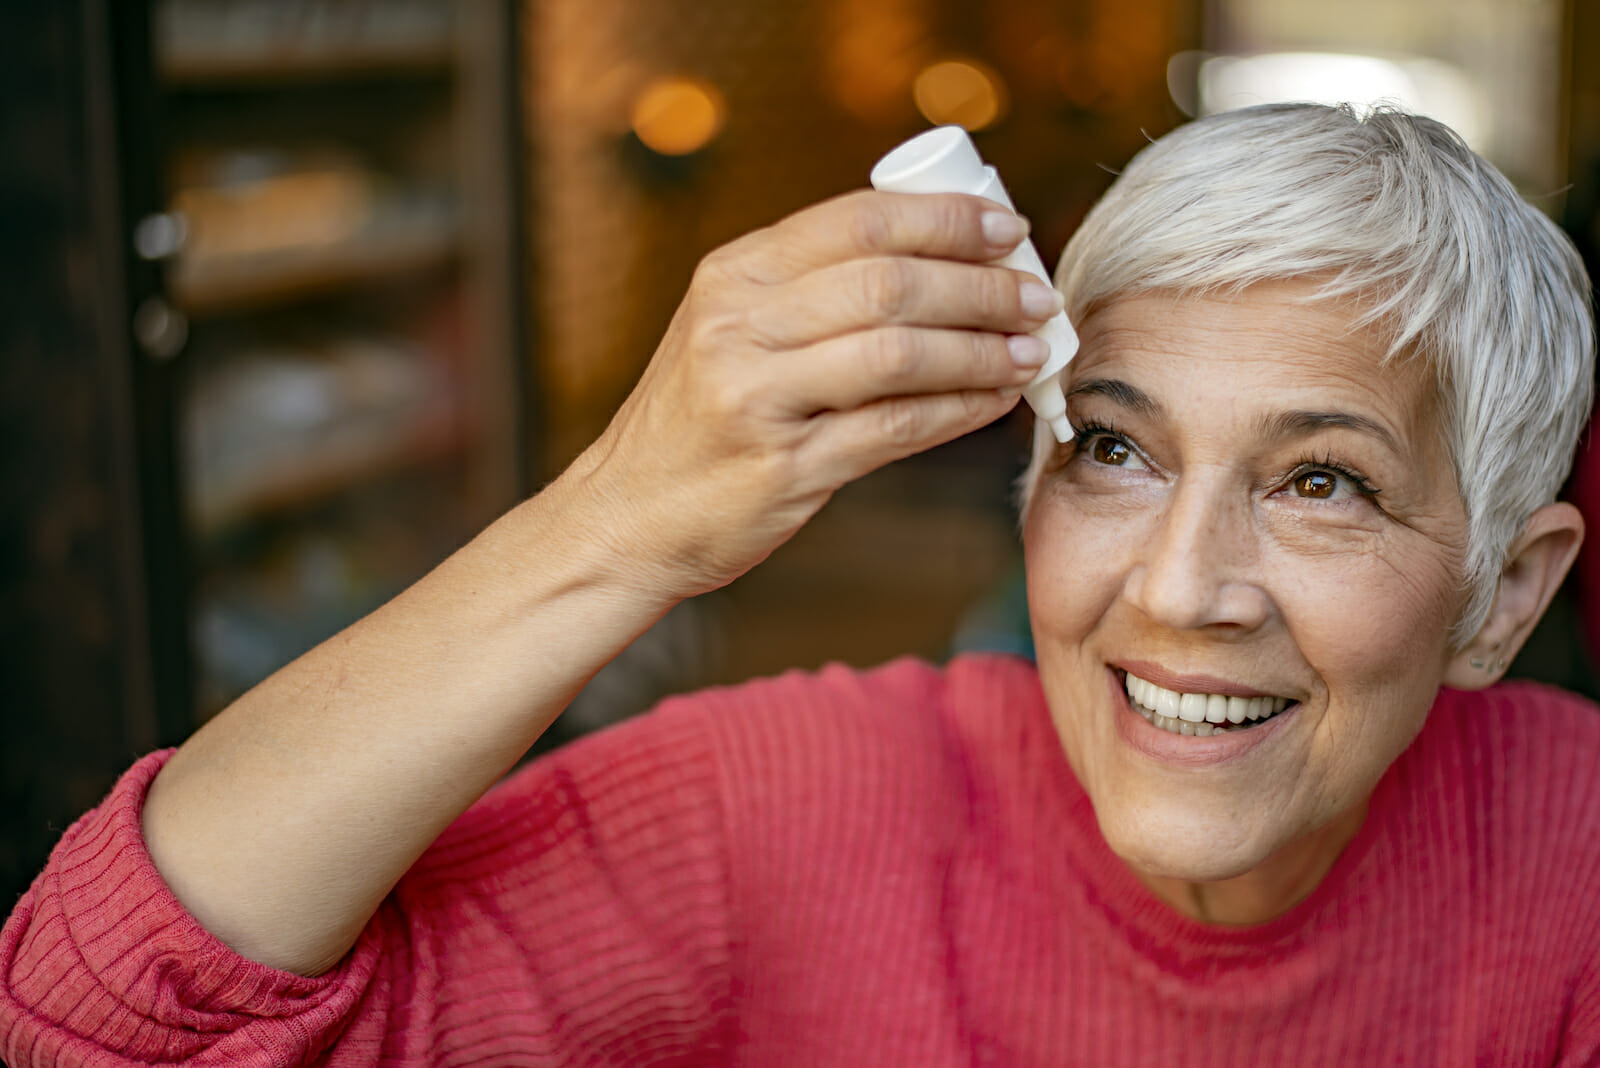 Photo of senior woman putting eye drop, closeup view of elderly person using bottle of eyedrops in her eyes. Sick old woman suffering from irritated eye, optical symptoms. Health concept. Concept of eye treatment, vision improvement, poor eyesight